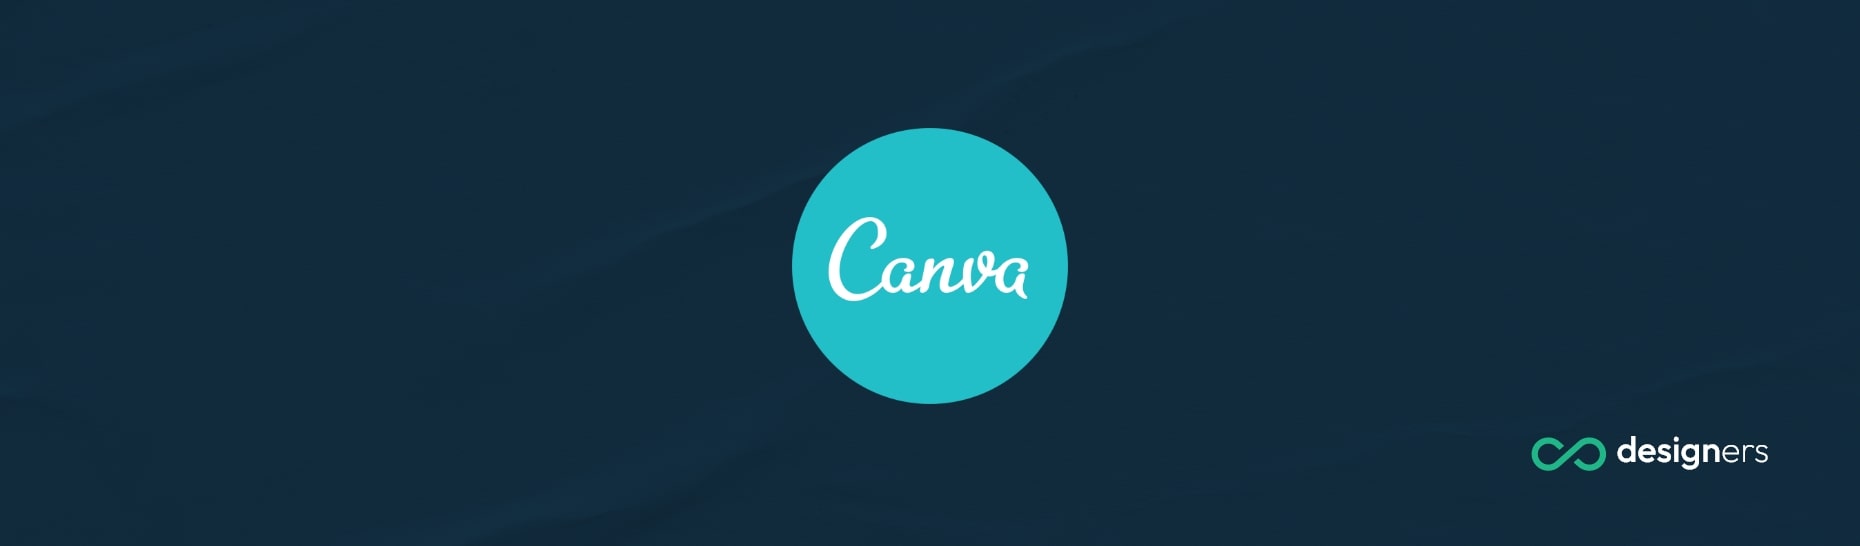 Is Canva Worth Paying For?